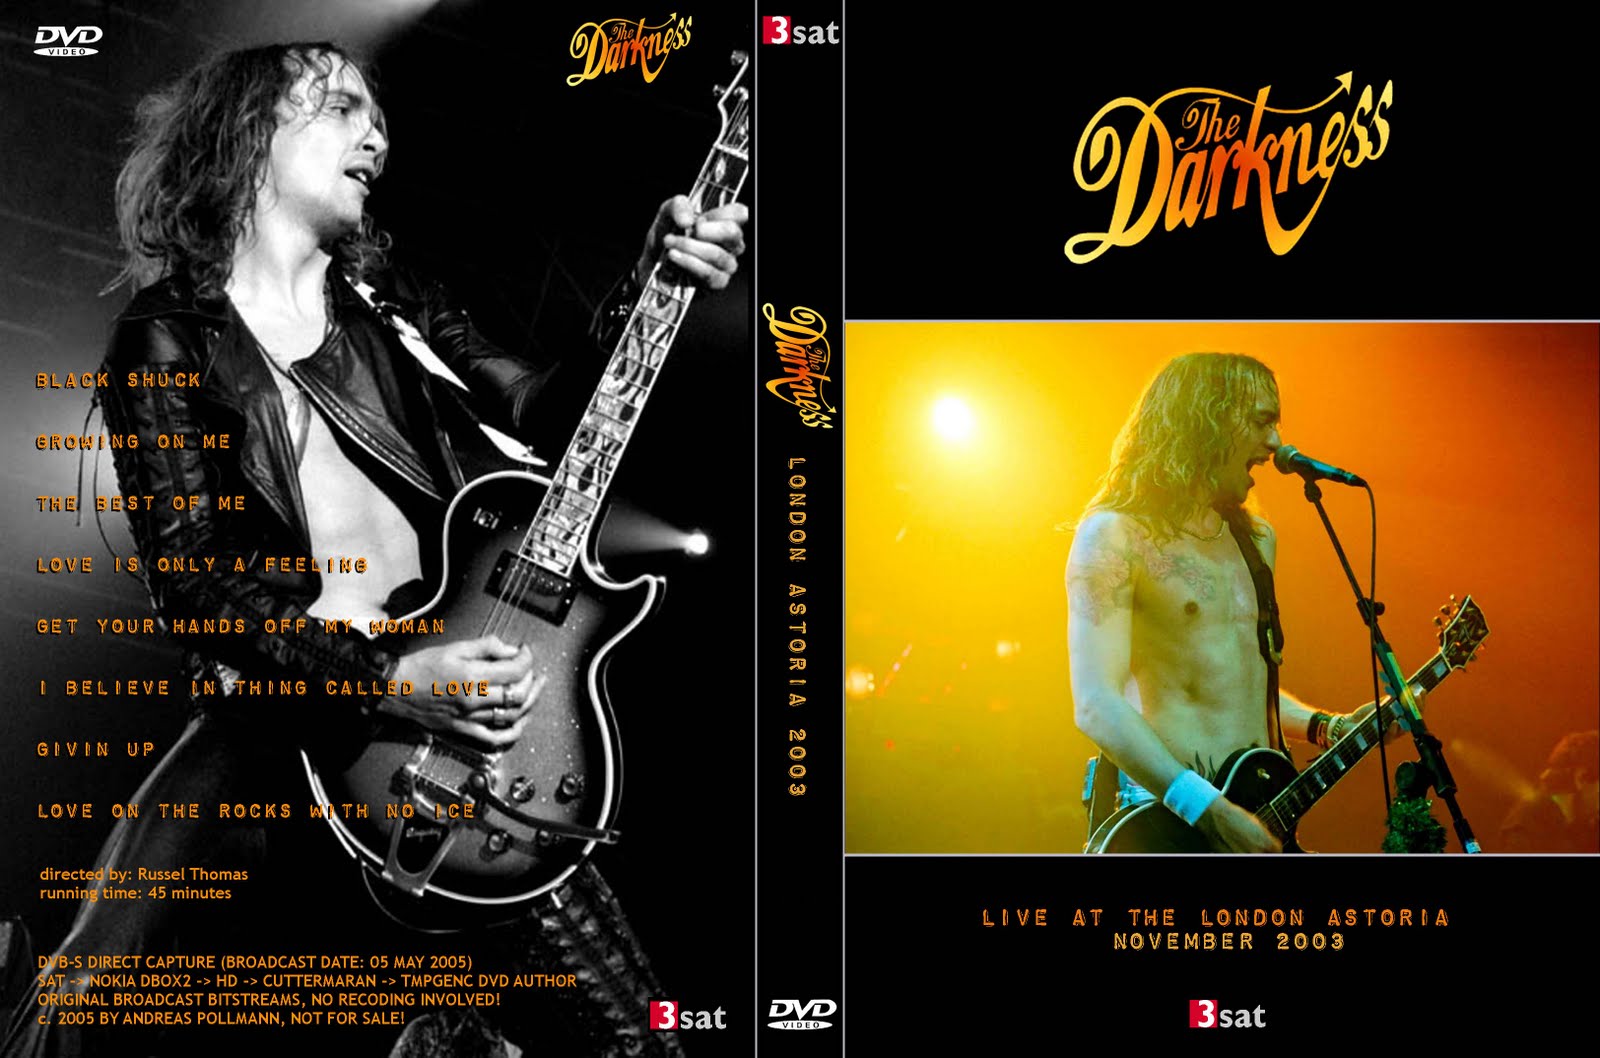 [The+Darkness+-+Live+at+the+London+Astoria,+November+2003+-+Cover.jpg]